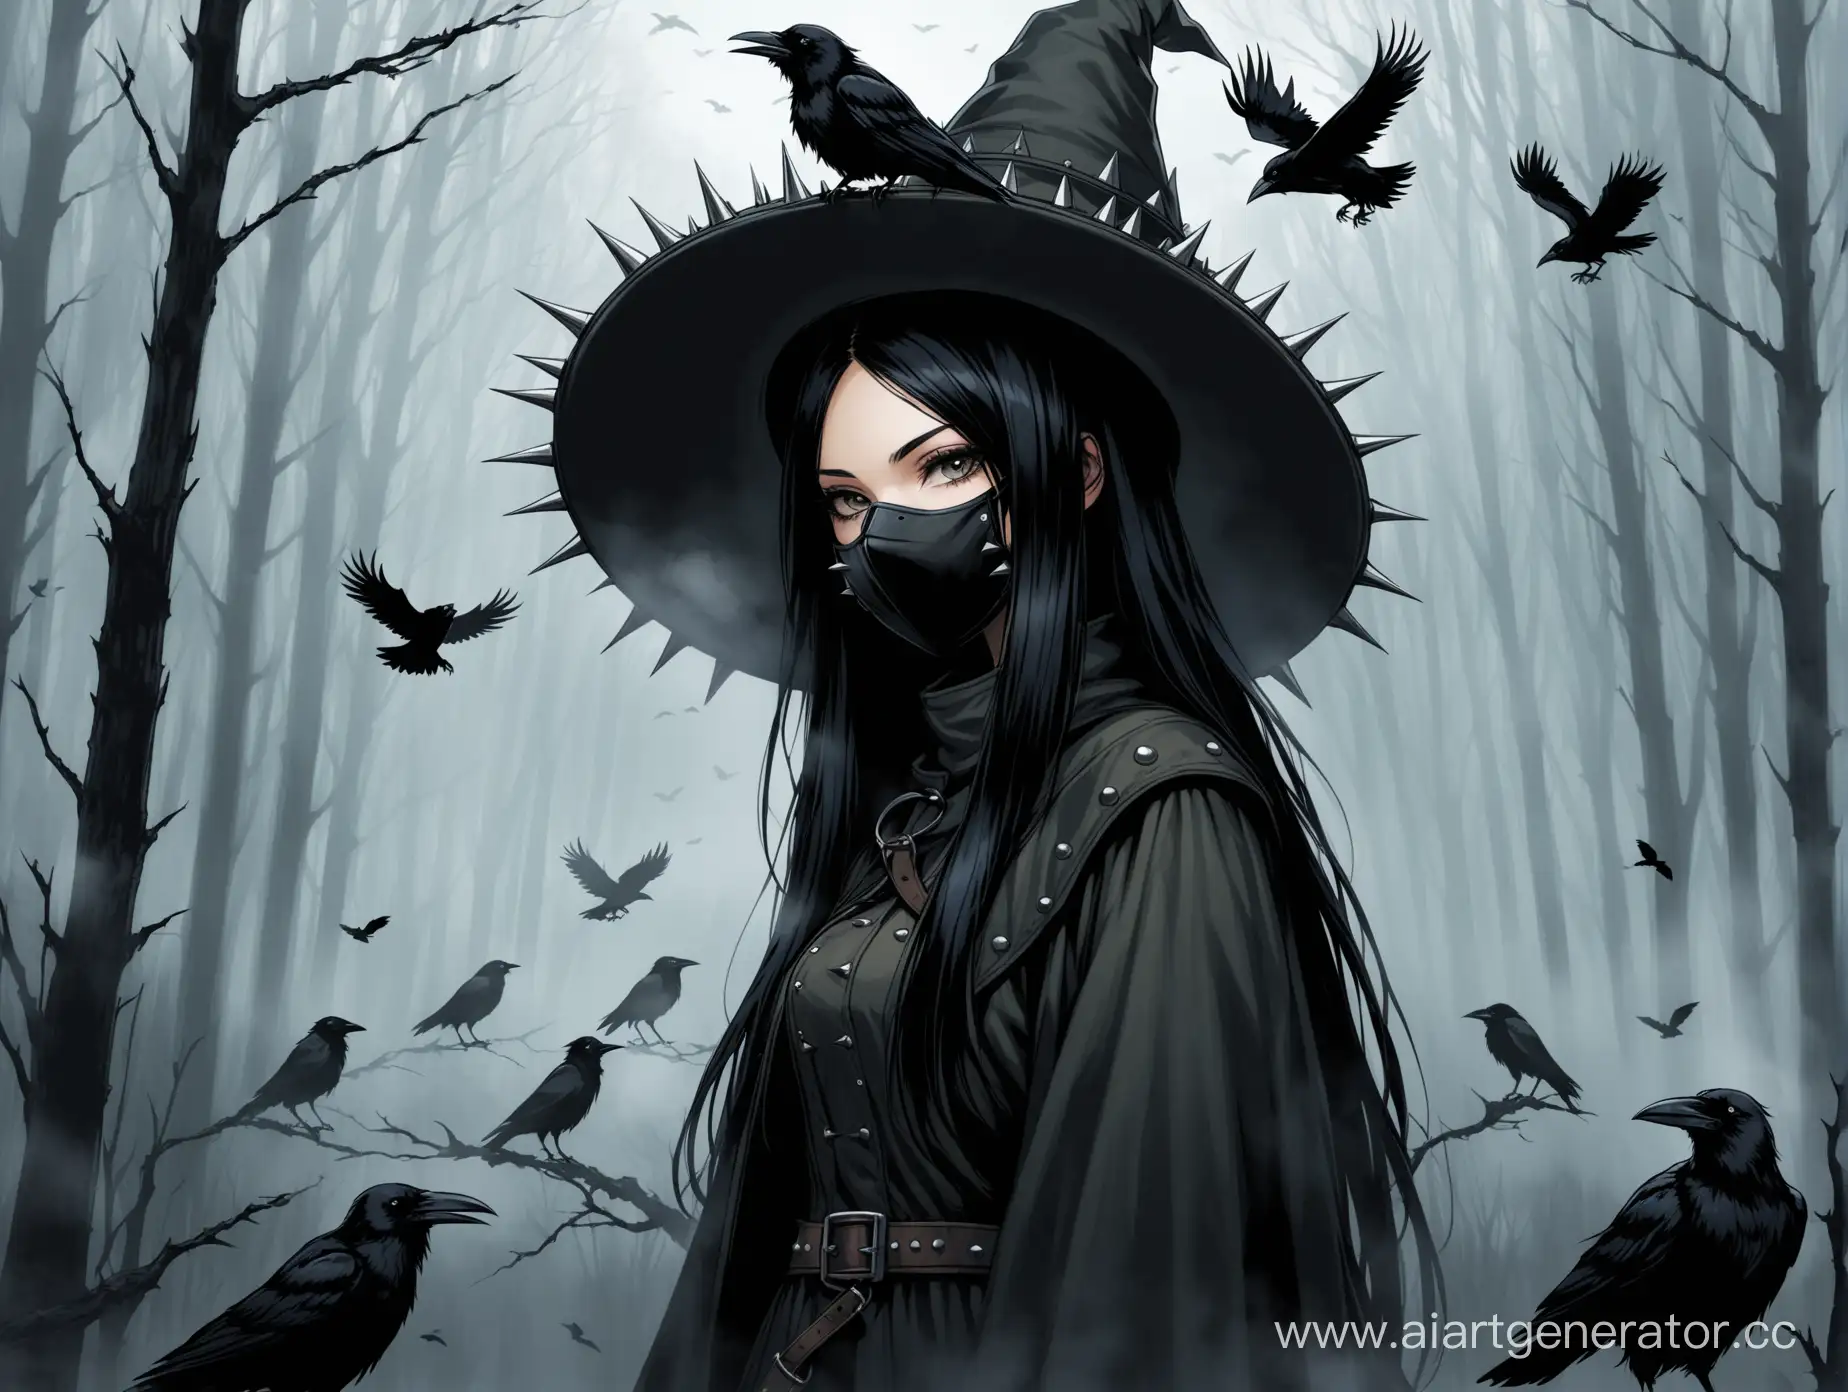 Mysterious-Girl-in-Kettle-Hat-and-Spiked-Mask-Amidst-Misty-Forest